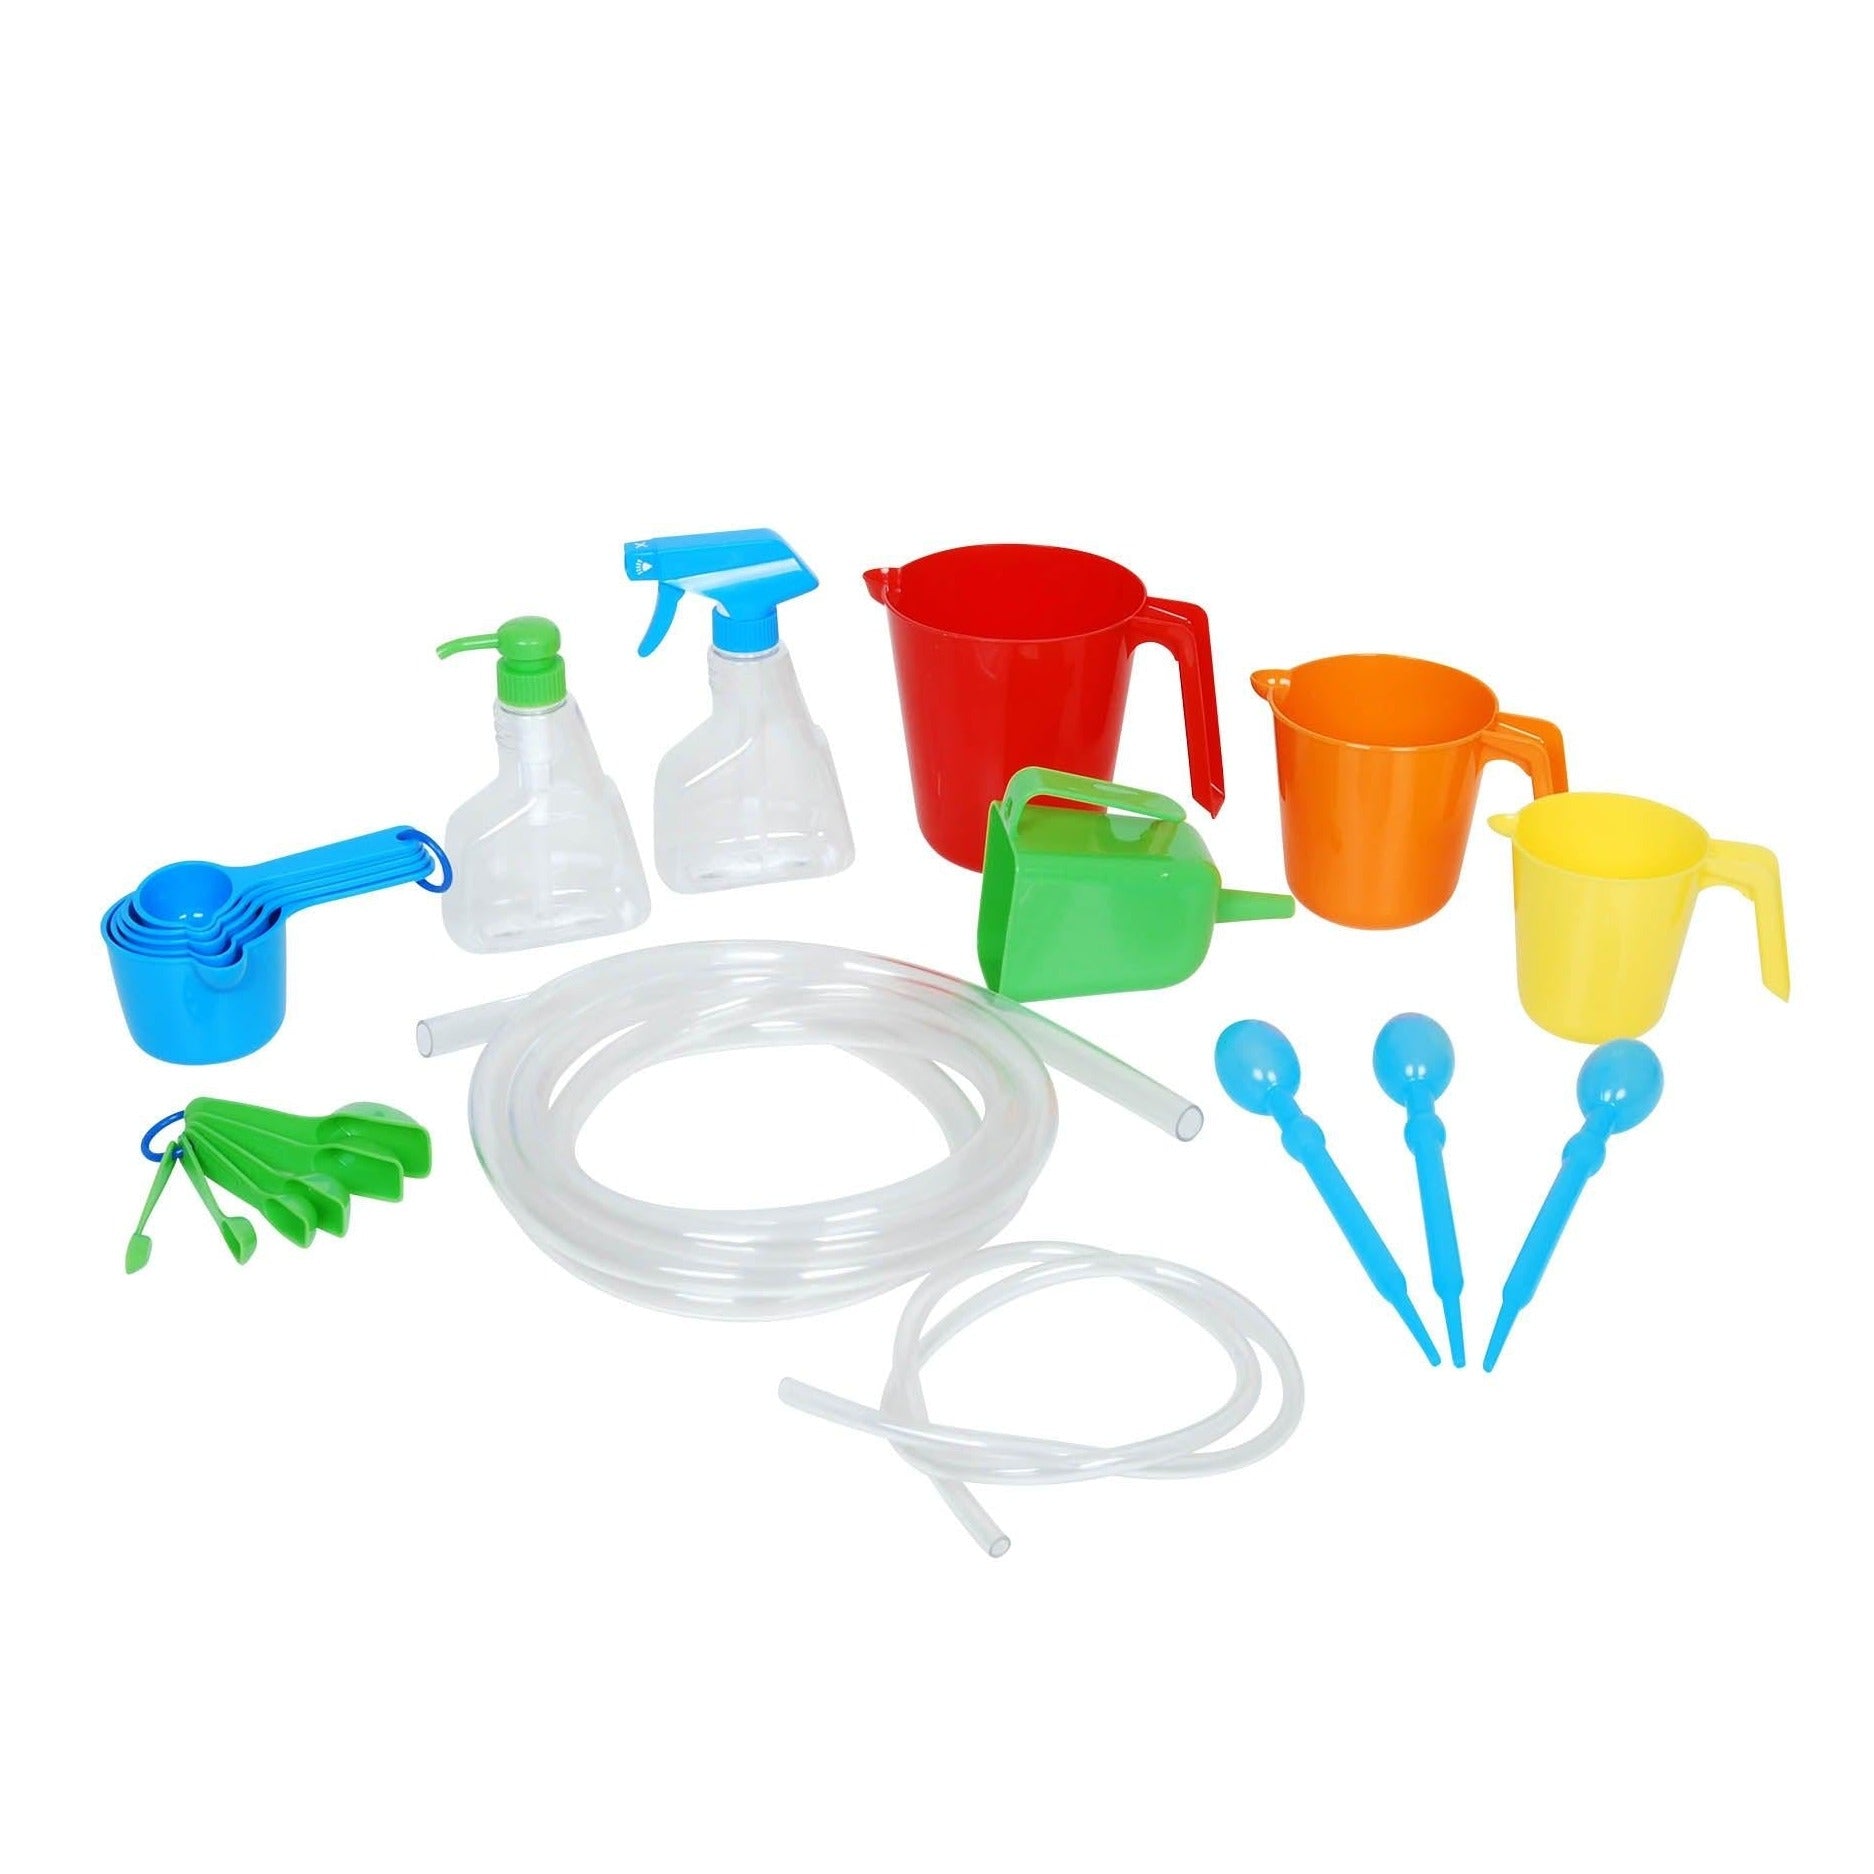 EDX Sand and Water Activity Set, Our edx education Sand & Water Activity Set is a great value accessory pack to accompany our Water Trays and Water Play Activity Rack, Your child will have hours of fun experimenting how different tactile materials can be measured and poured with cups, jugs and spoons and enjoy filling the spray bottles and pipettes with water. Why not add a drop of food colouring to the water and create a colourful water tube with the funnels and hose. The possibilities for imaginative play